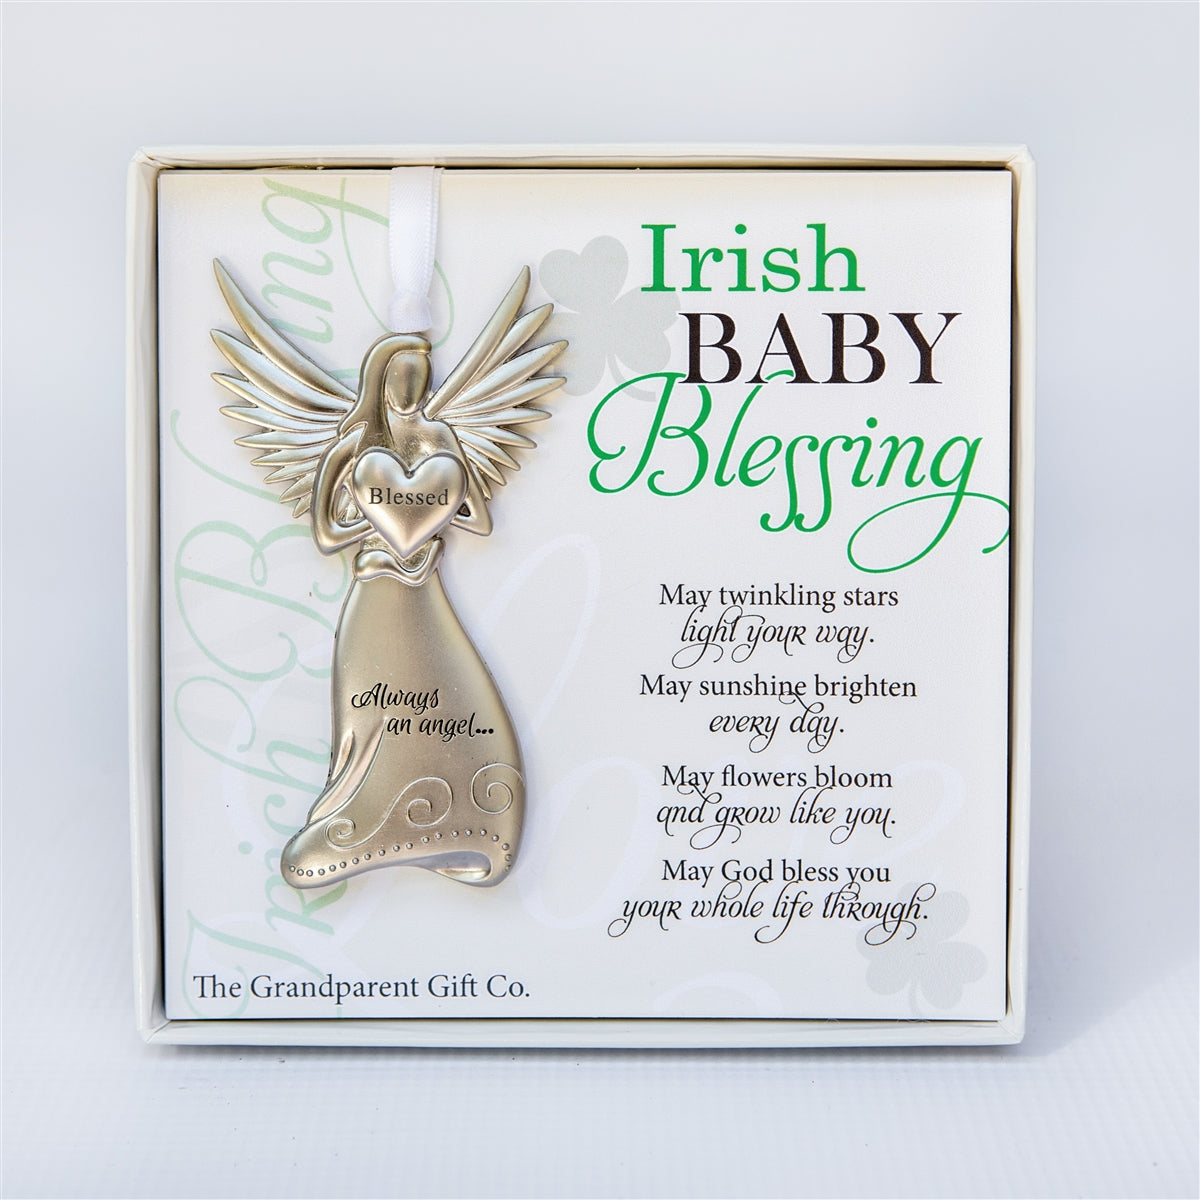 Irish Blessing Baby Gift - 4&quot; metal blessed angel ornament with &quot;Irish Baby Blessing&quot; poem in white box with clear lid.